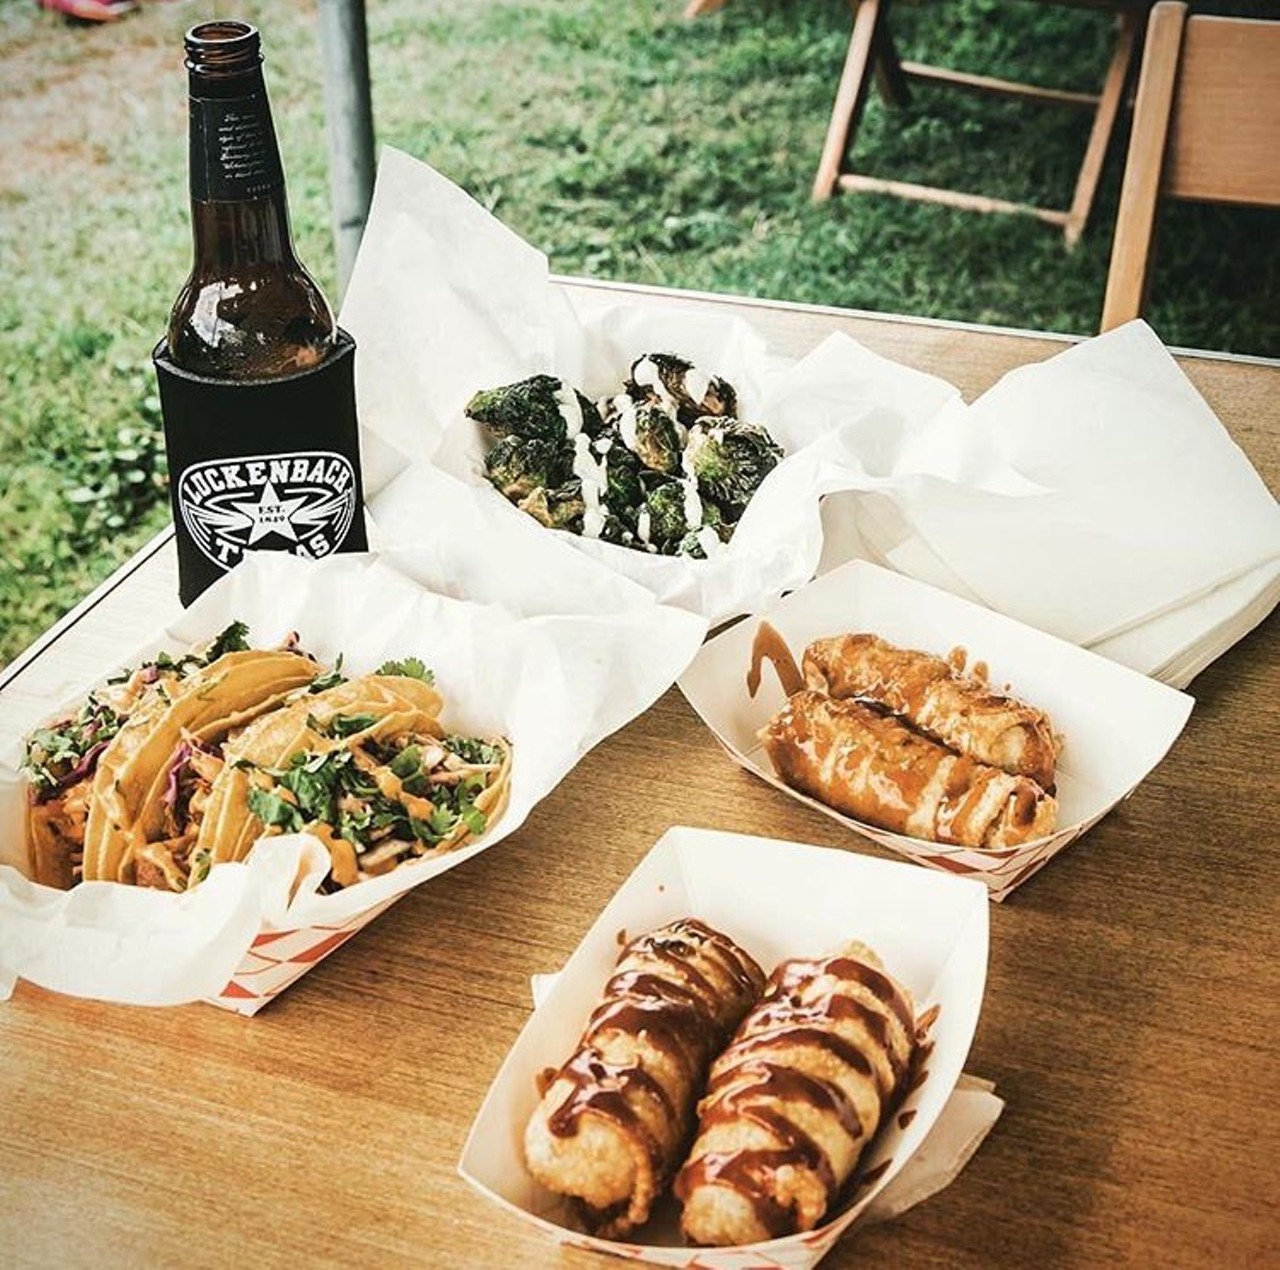 Food Truck Fest
$15, Sat Jun 23, 412 Luckenbach Town Loop, Fredericksburg, visitfredericksburgtx.com
The Luckenbach Food Truck Fest will feature 14 regional food trucks and 12 Texas Hill Country wineries. Proceeds will benefit the Texas Center for Wine and Culinary Arts. 
Photo via Instagram / fredericksburgfarms